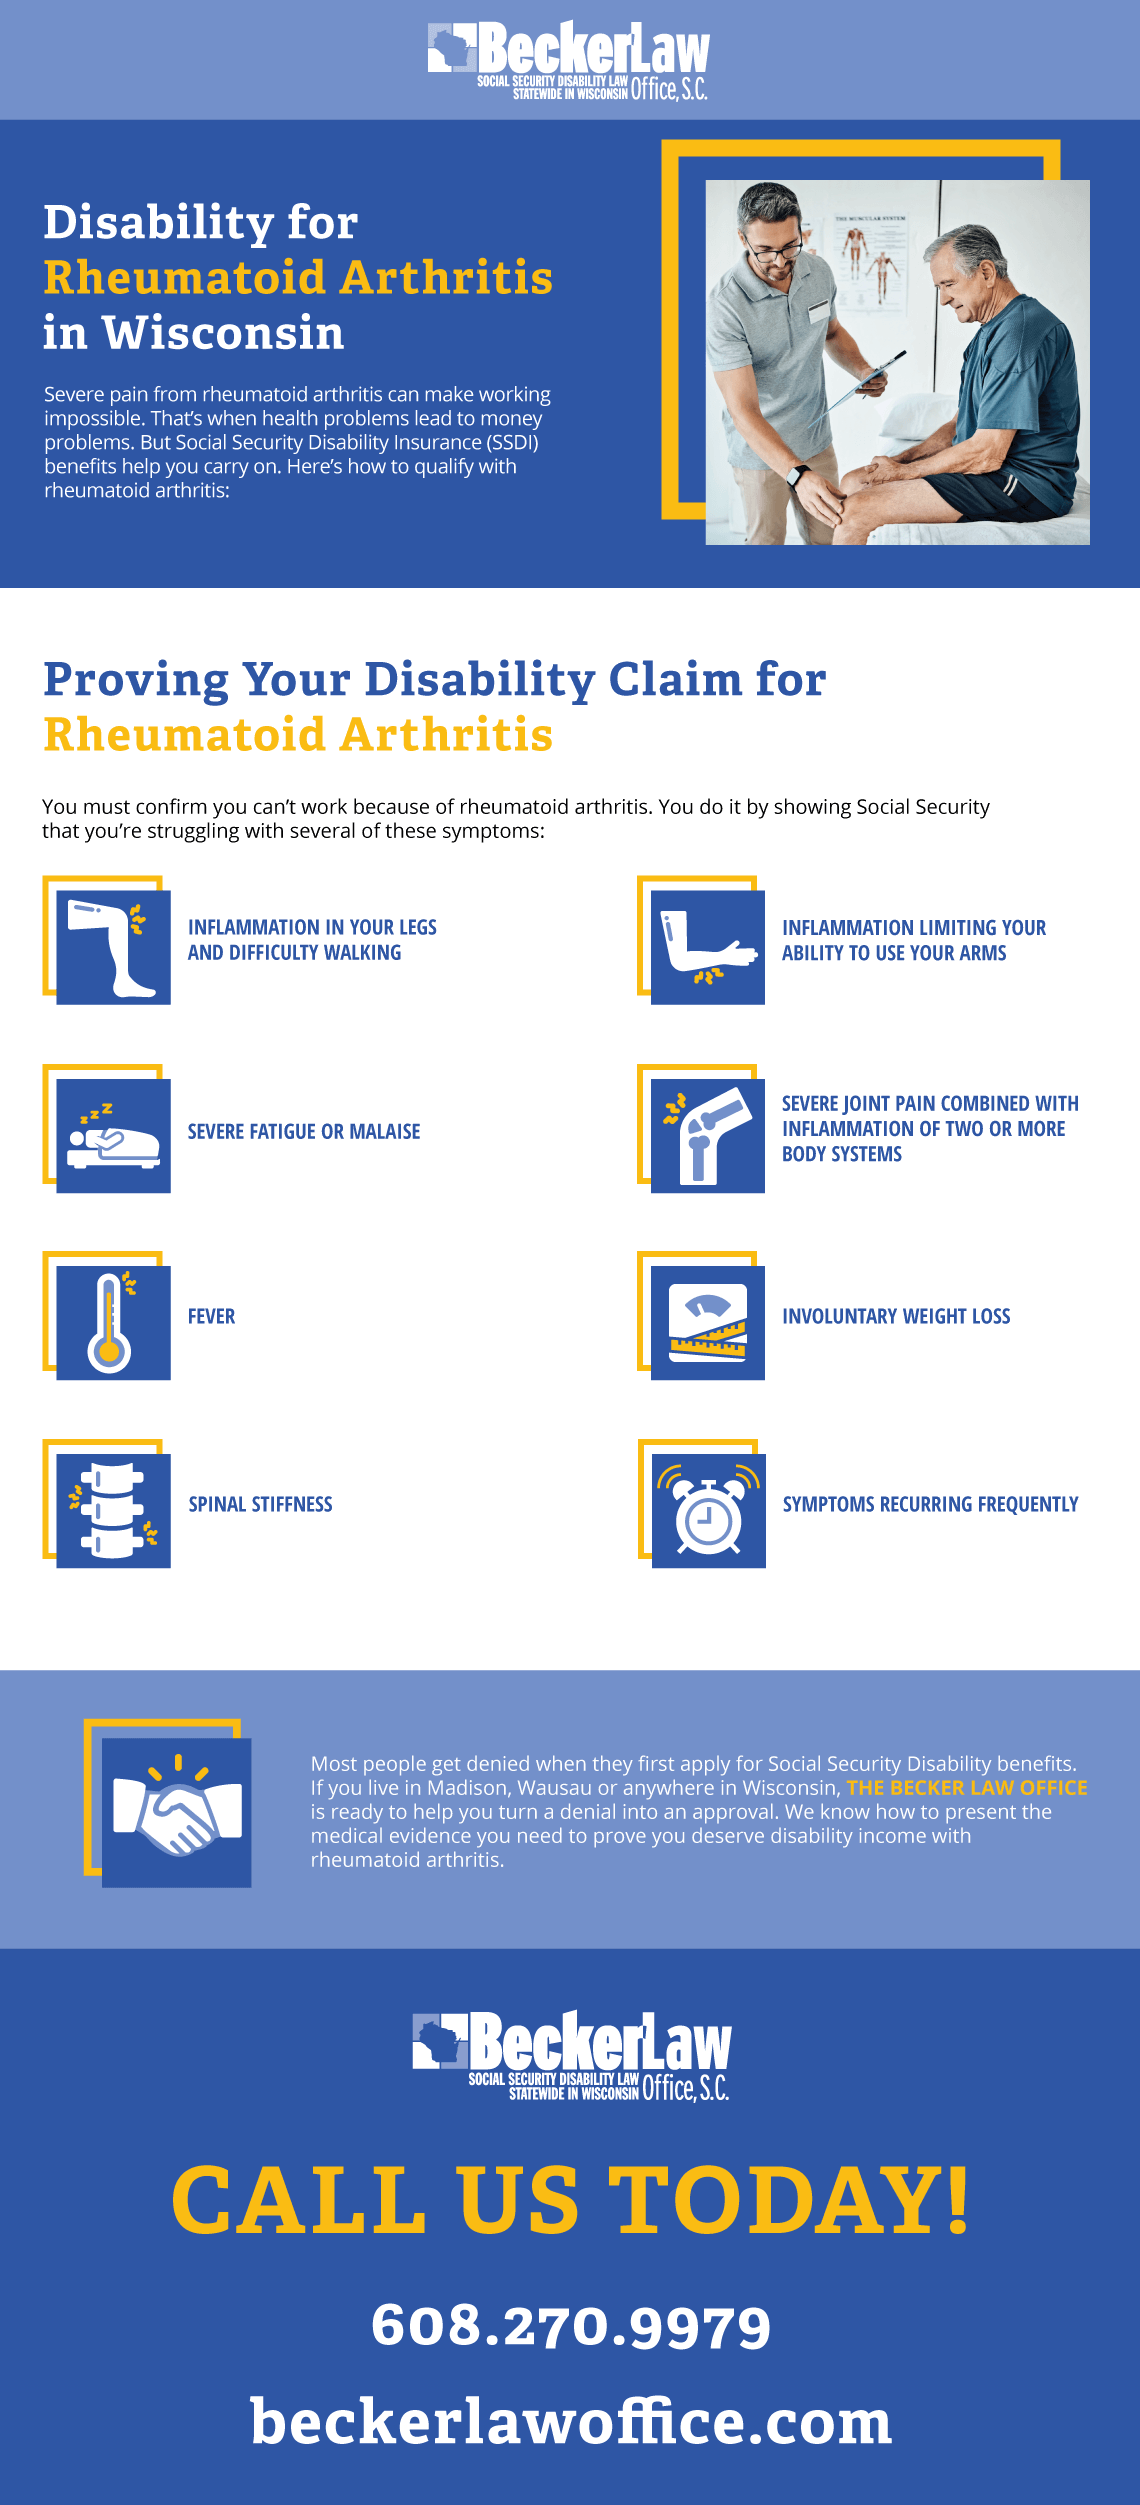 An infographic detailing how to win disability benefits for rheumatoid arthritis.